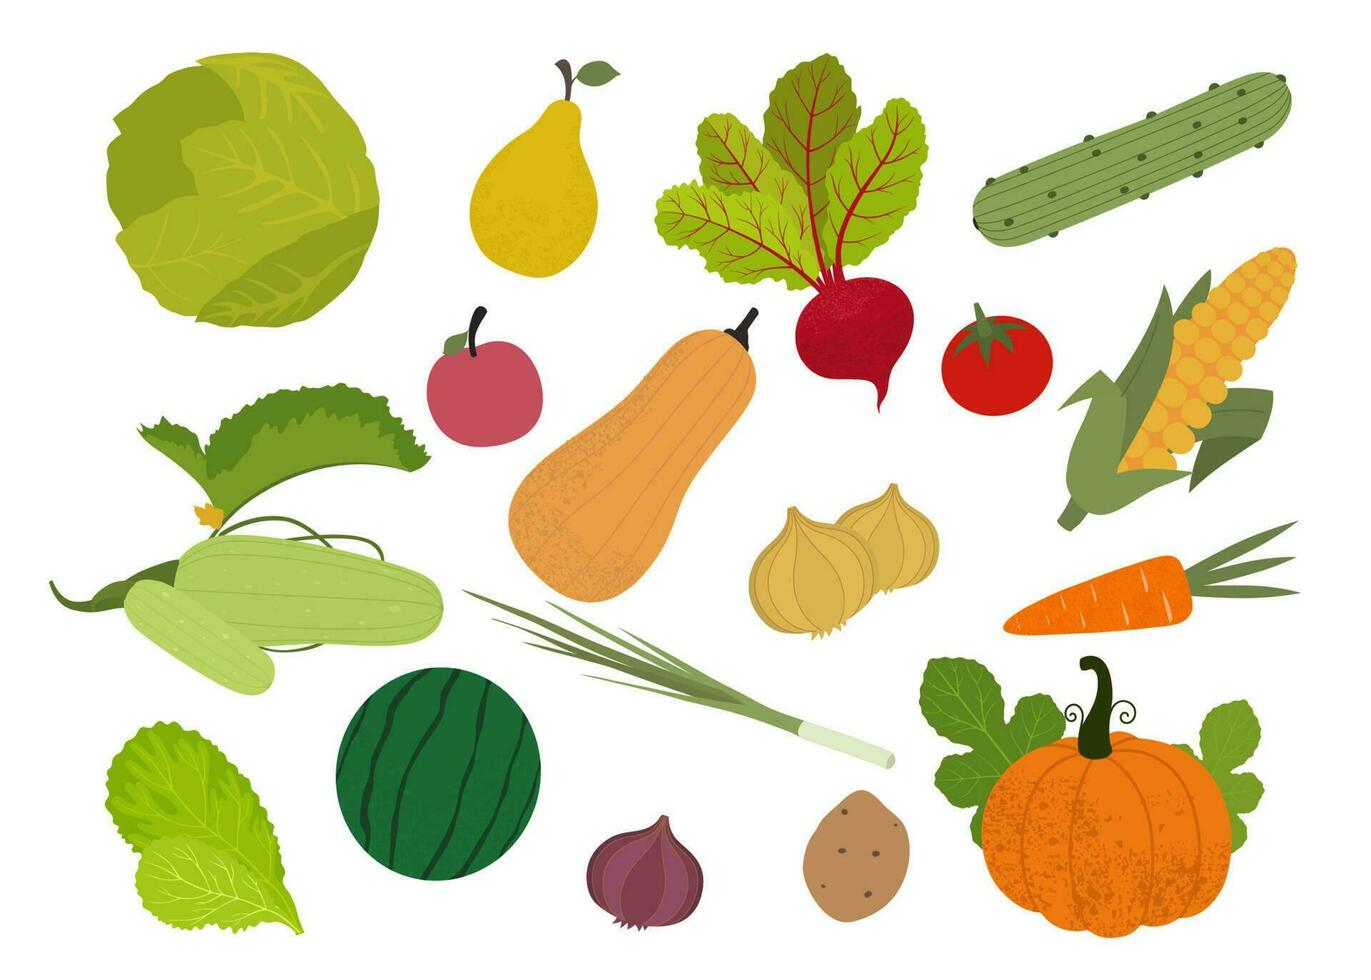 Fruits and vegetables. Flat style food. Isolated vector illustration.